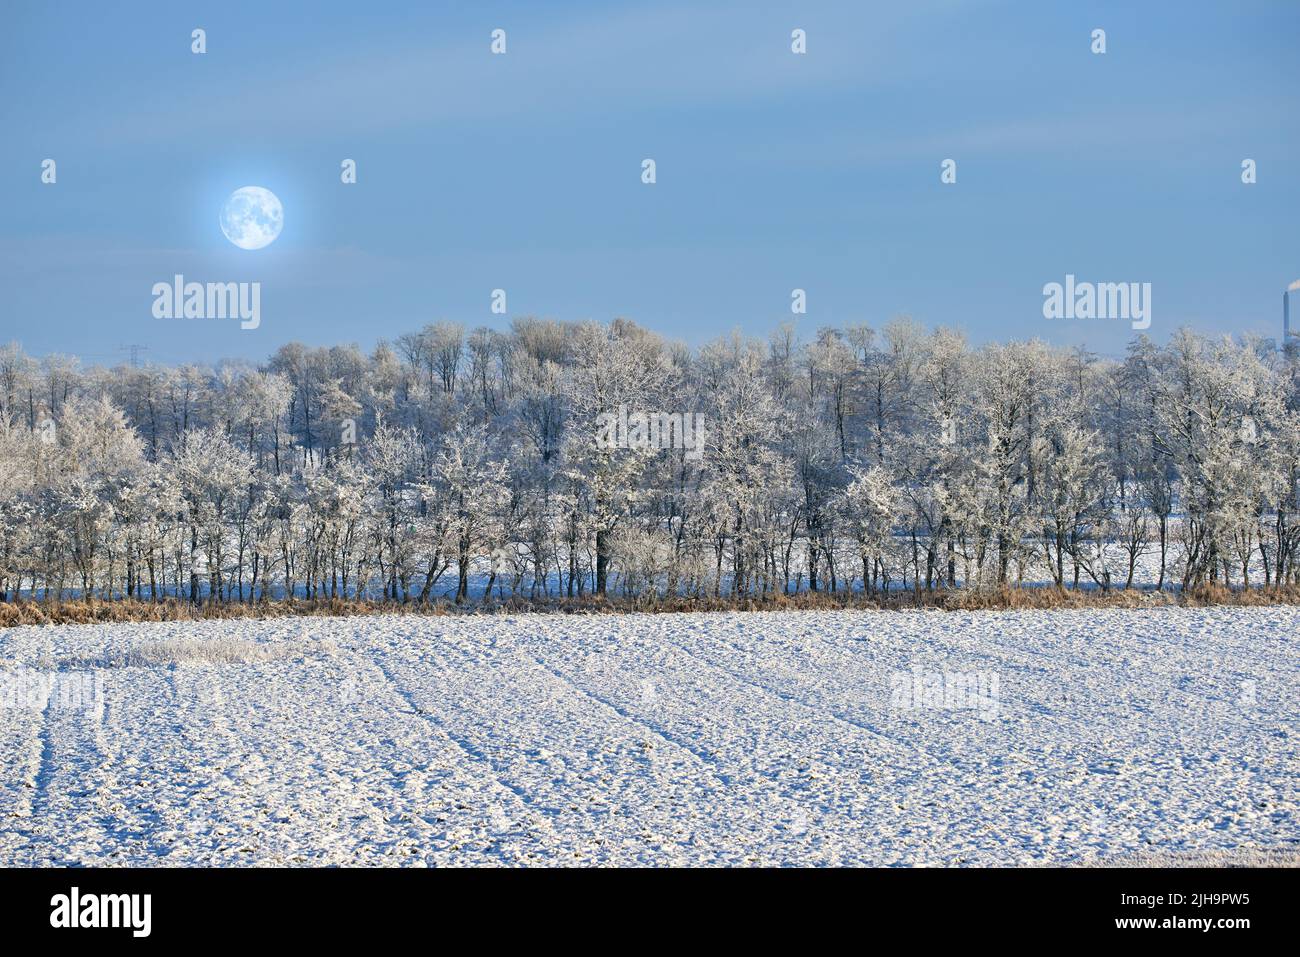 Tall trees on an open field during winter on a cold moonlit night. Large woods surrounded by snow covered land, grass and foliage. Landscape of nature Stock Photo